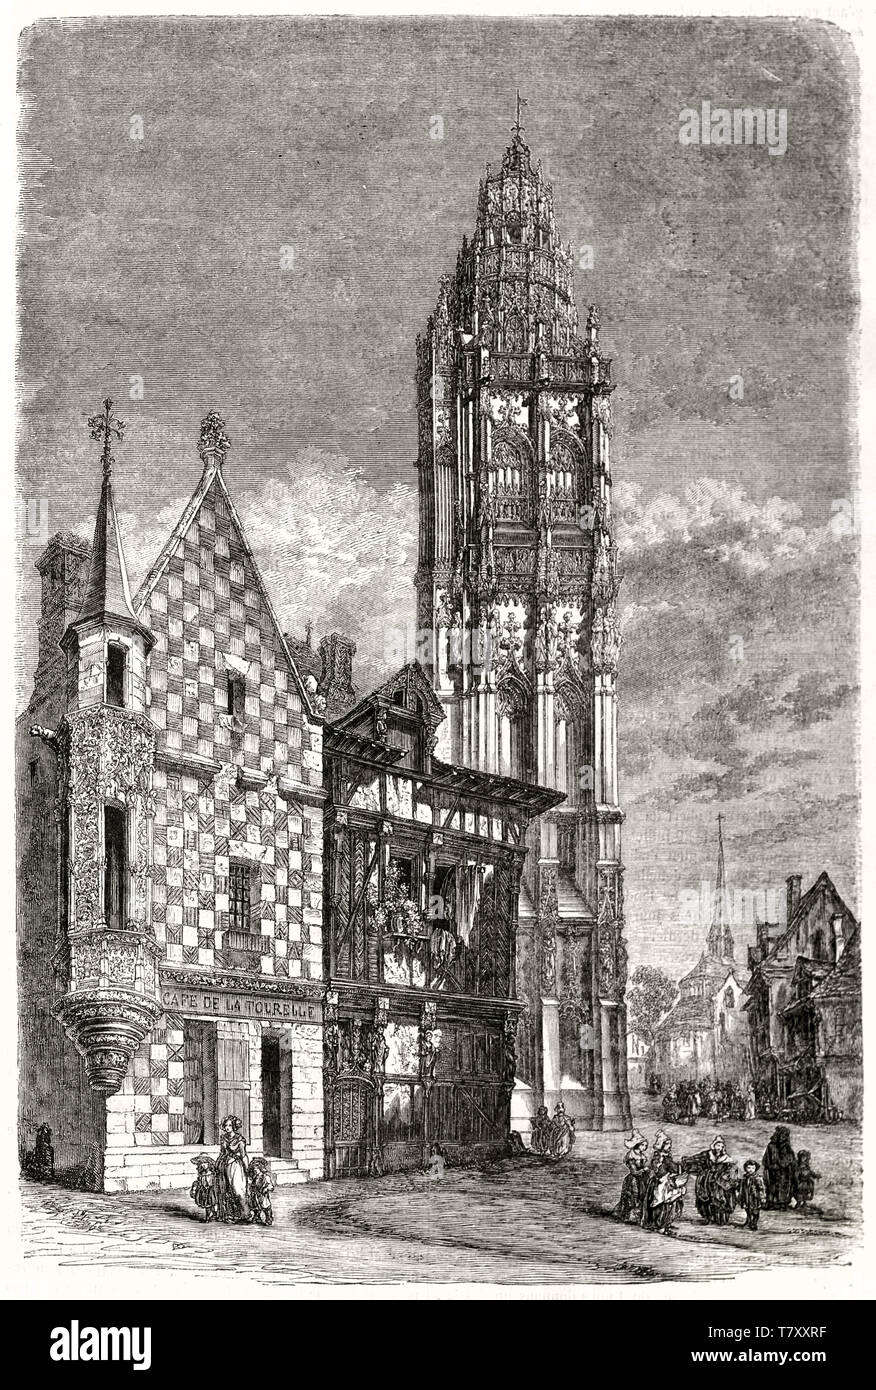 Ancient vertical foreshortening of the Tour de la Madeleine (Madeleine tower, Verneuil-sur-Avre France) in a medieval context. Etching illustration by Lancelot publ. on Magasin Pittoresque Paris 1848 Stock Photo